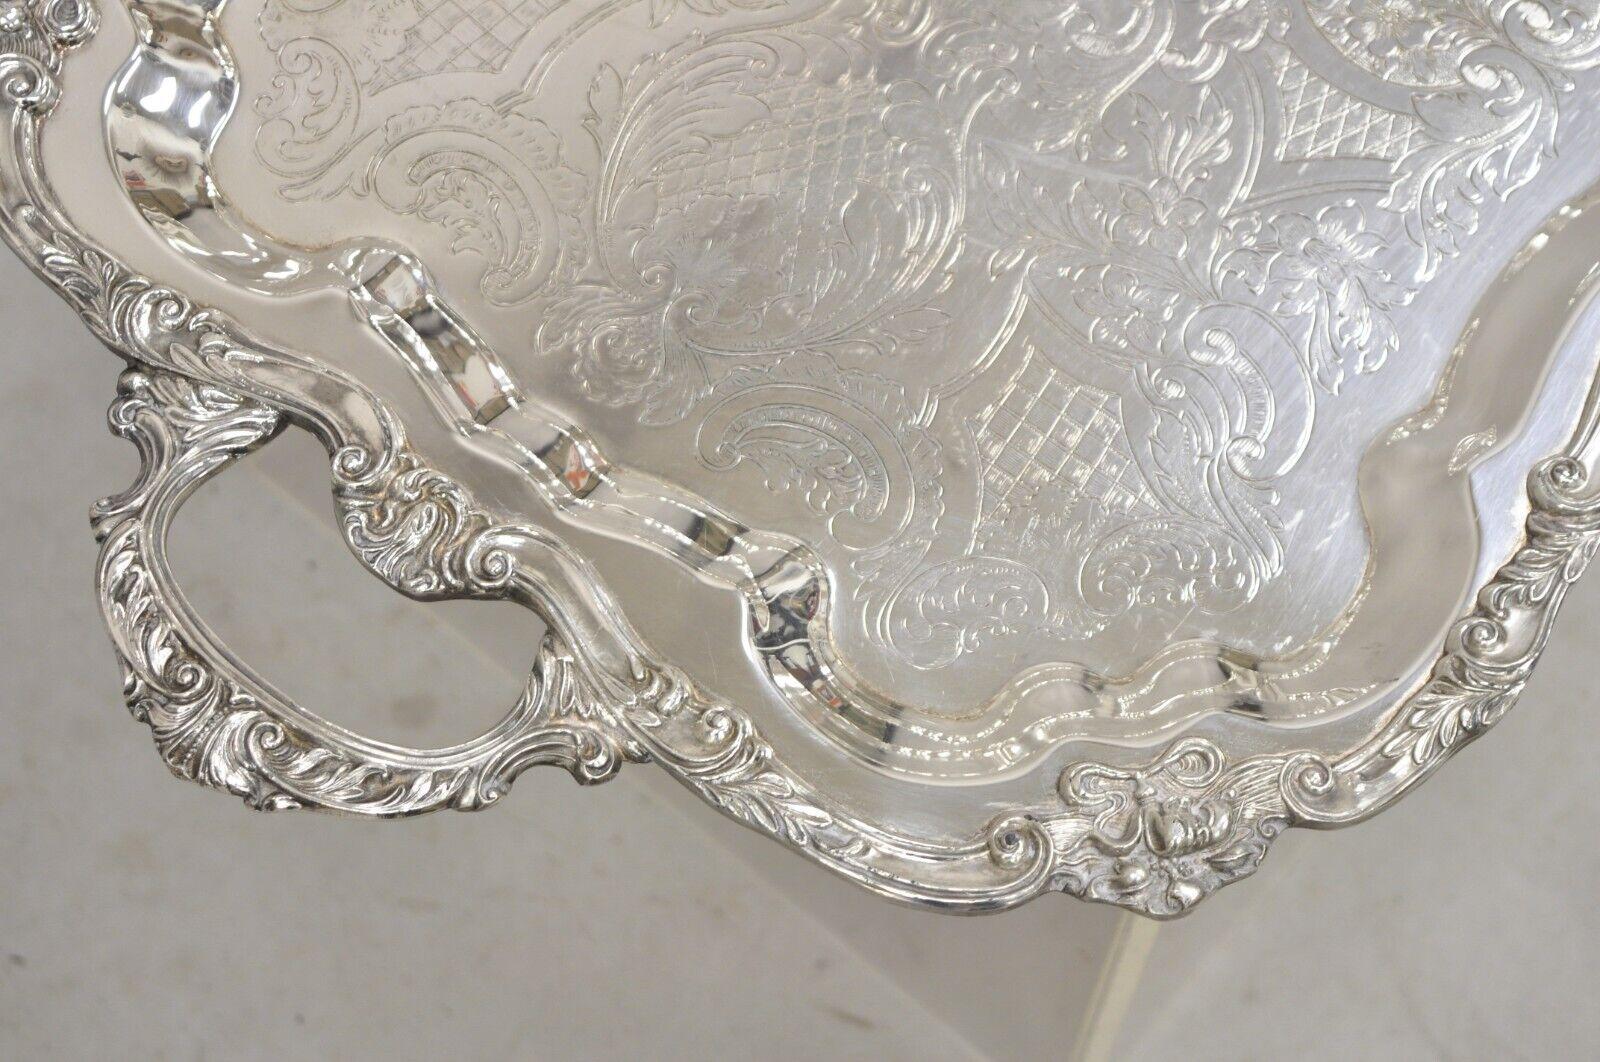 Vintage Sheridan Large Ornate Silver Plated Victorian Style Serving Platter Tray For Sale 7